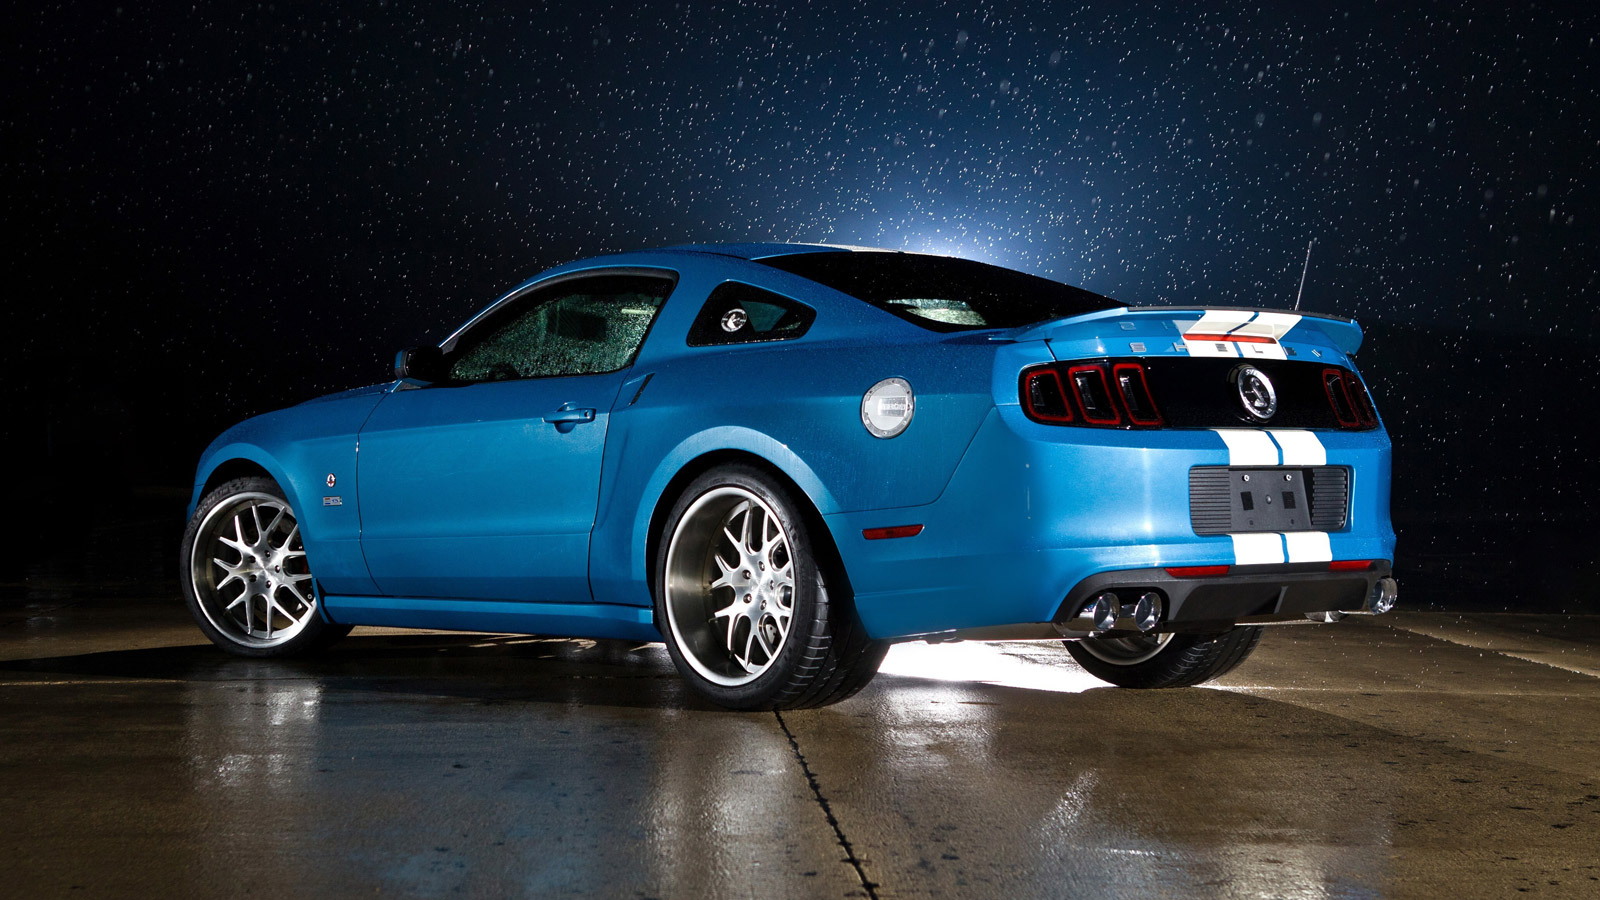 2013 Ford Mustang Shelby GT500 Cobra